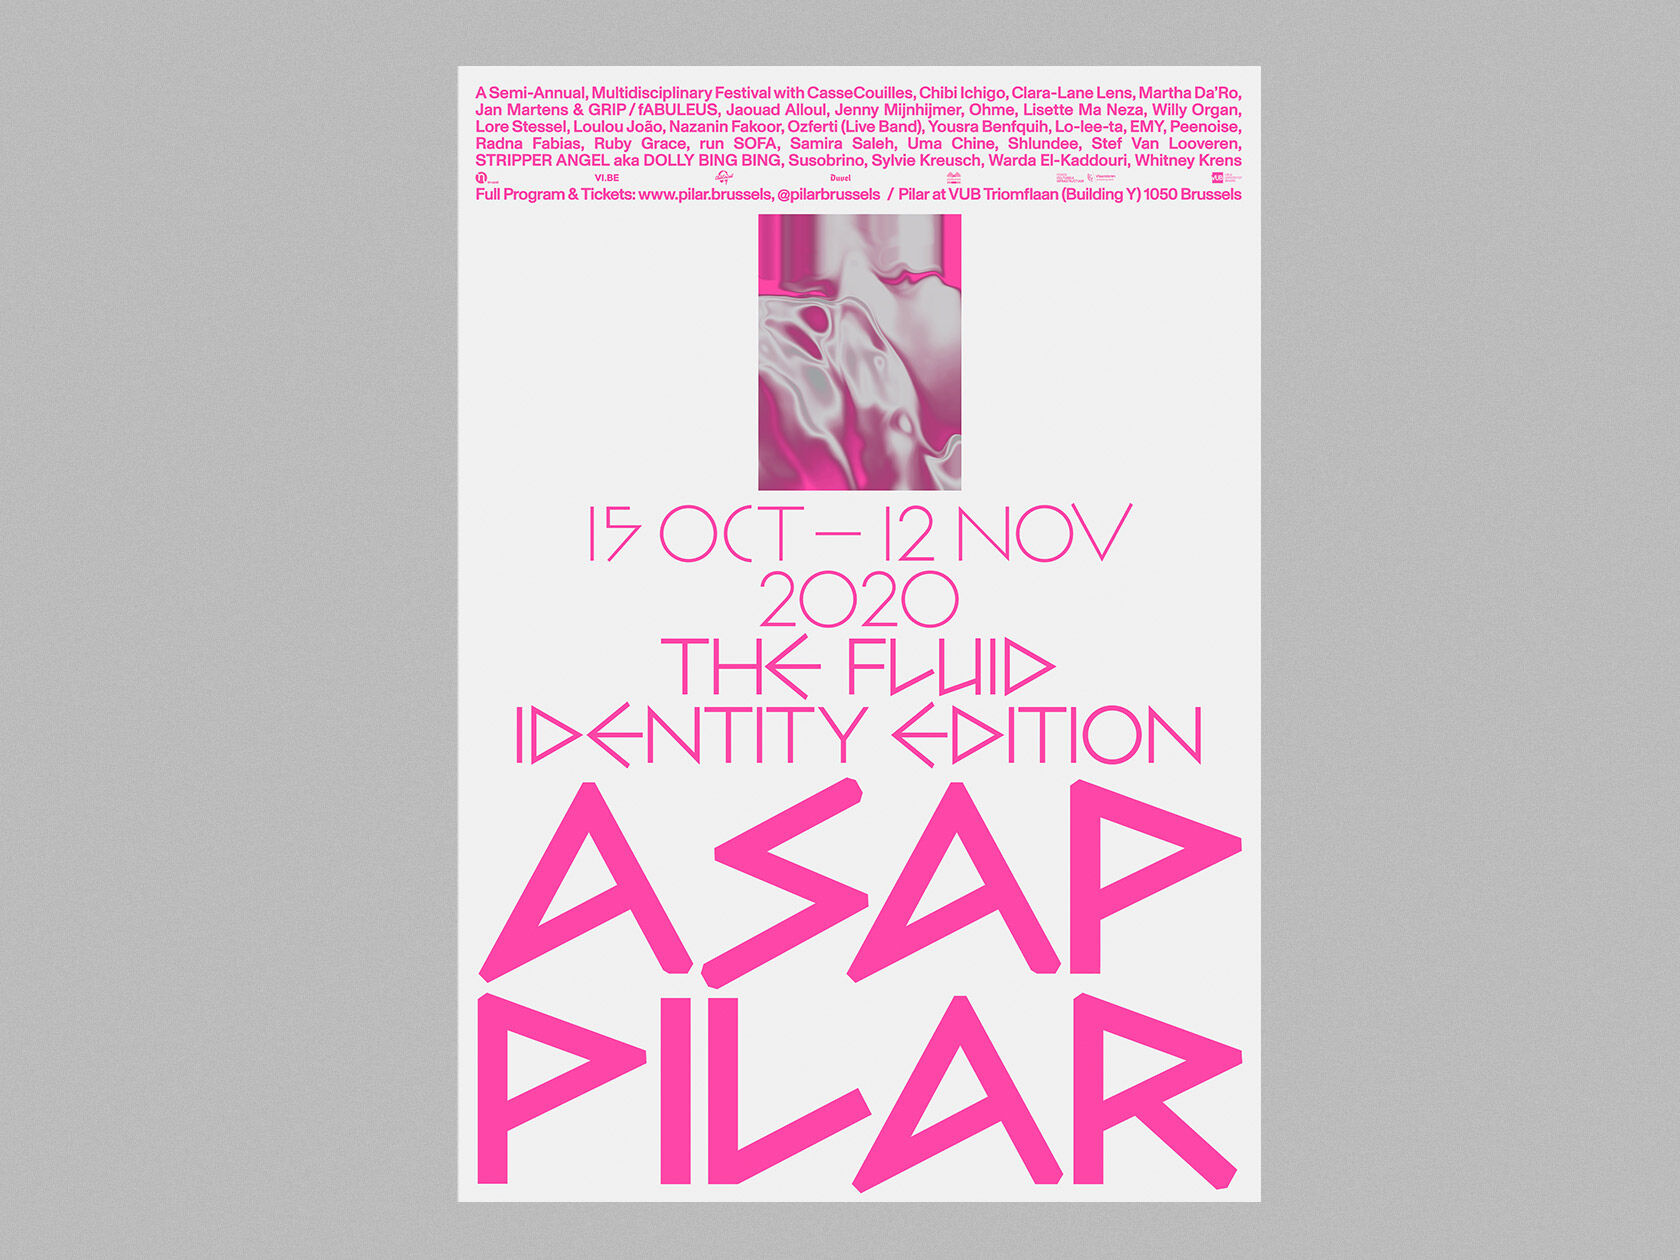 Lennart Van den Bossche and Corbin Mahieu on the identity system for PILAR, the launch of their new studio and the importance of a creative network